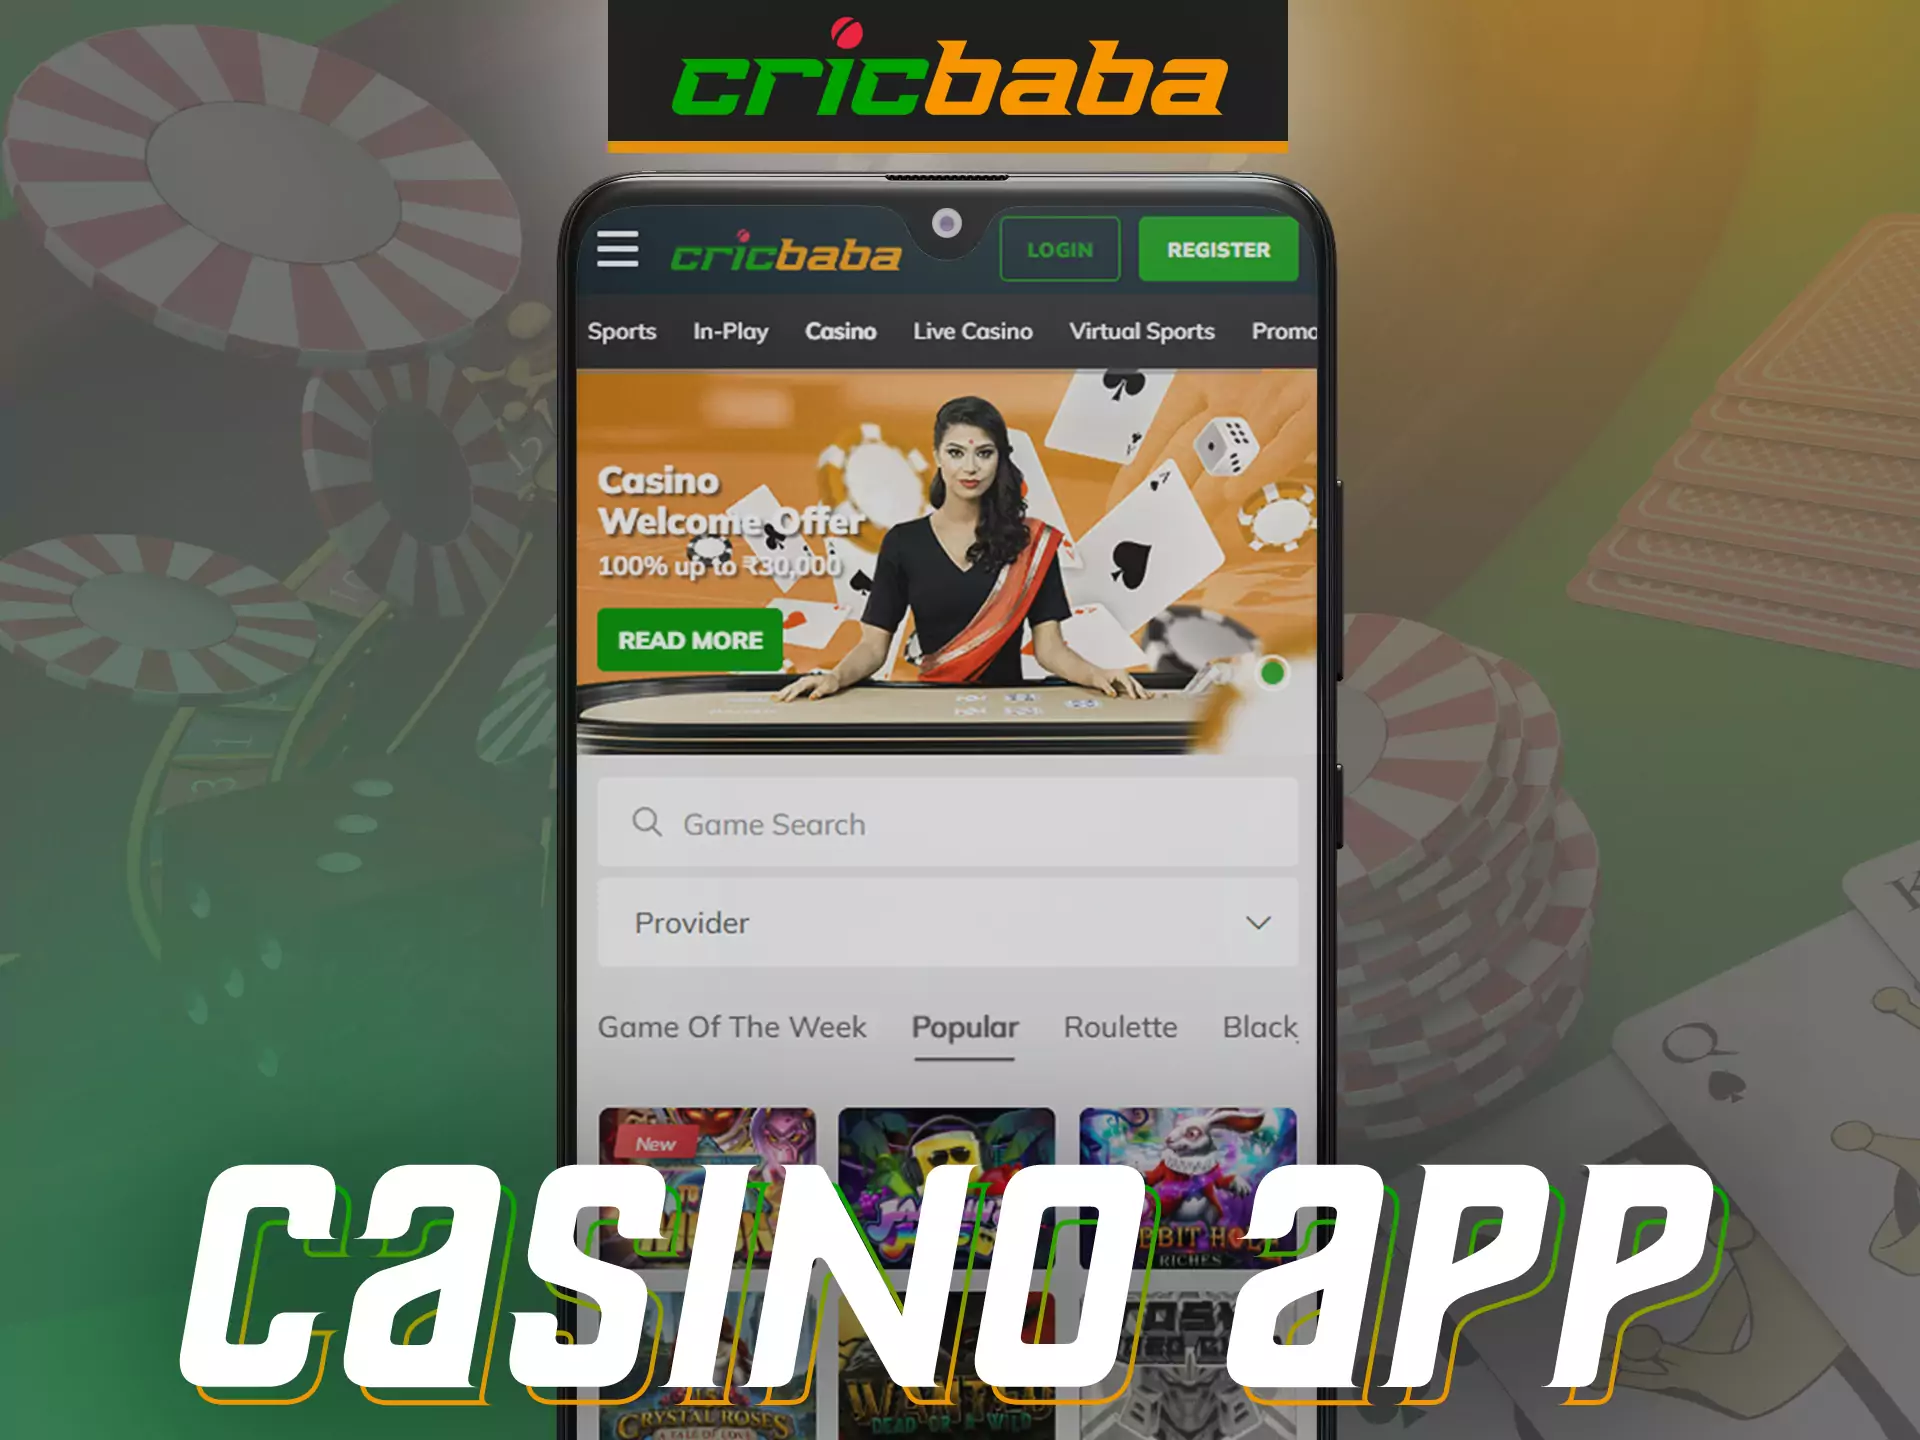 The Cricbaba Casino app offers players various games and bonuses.